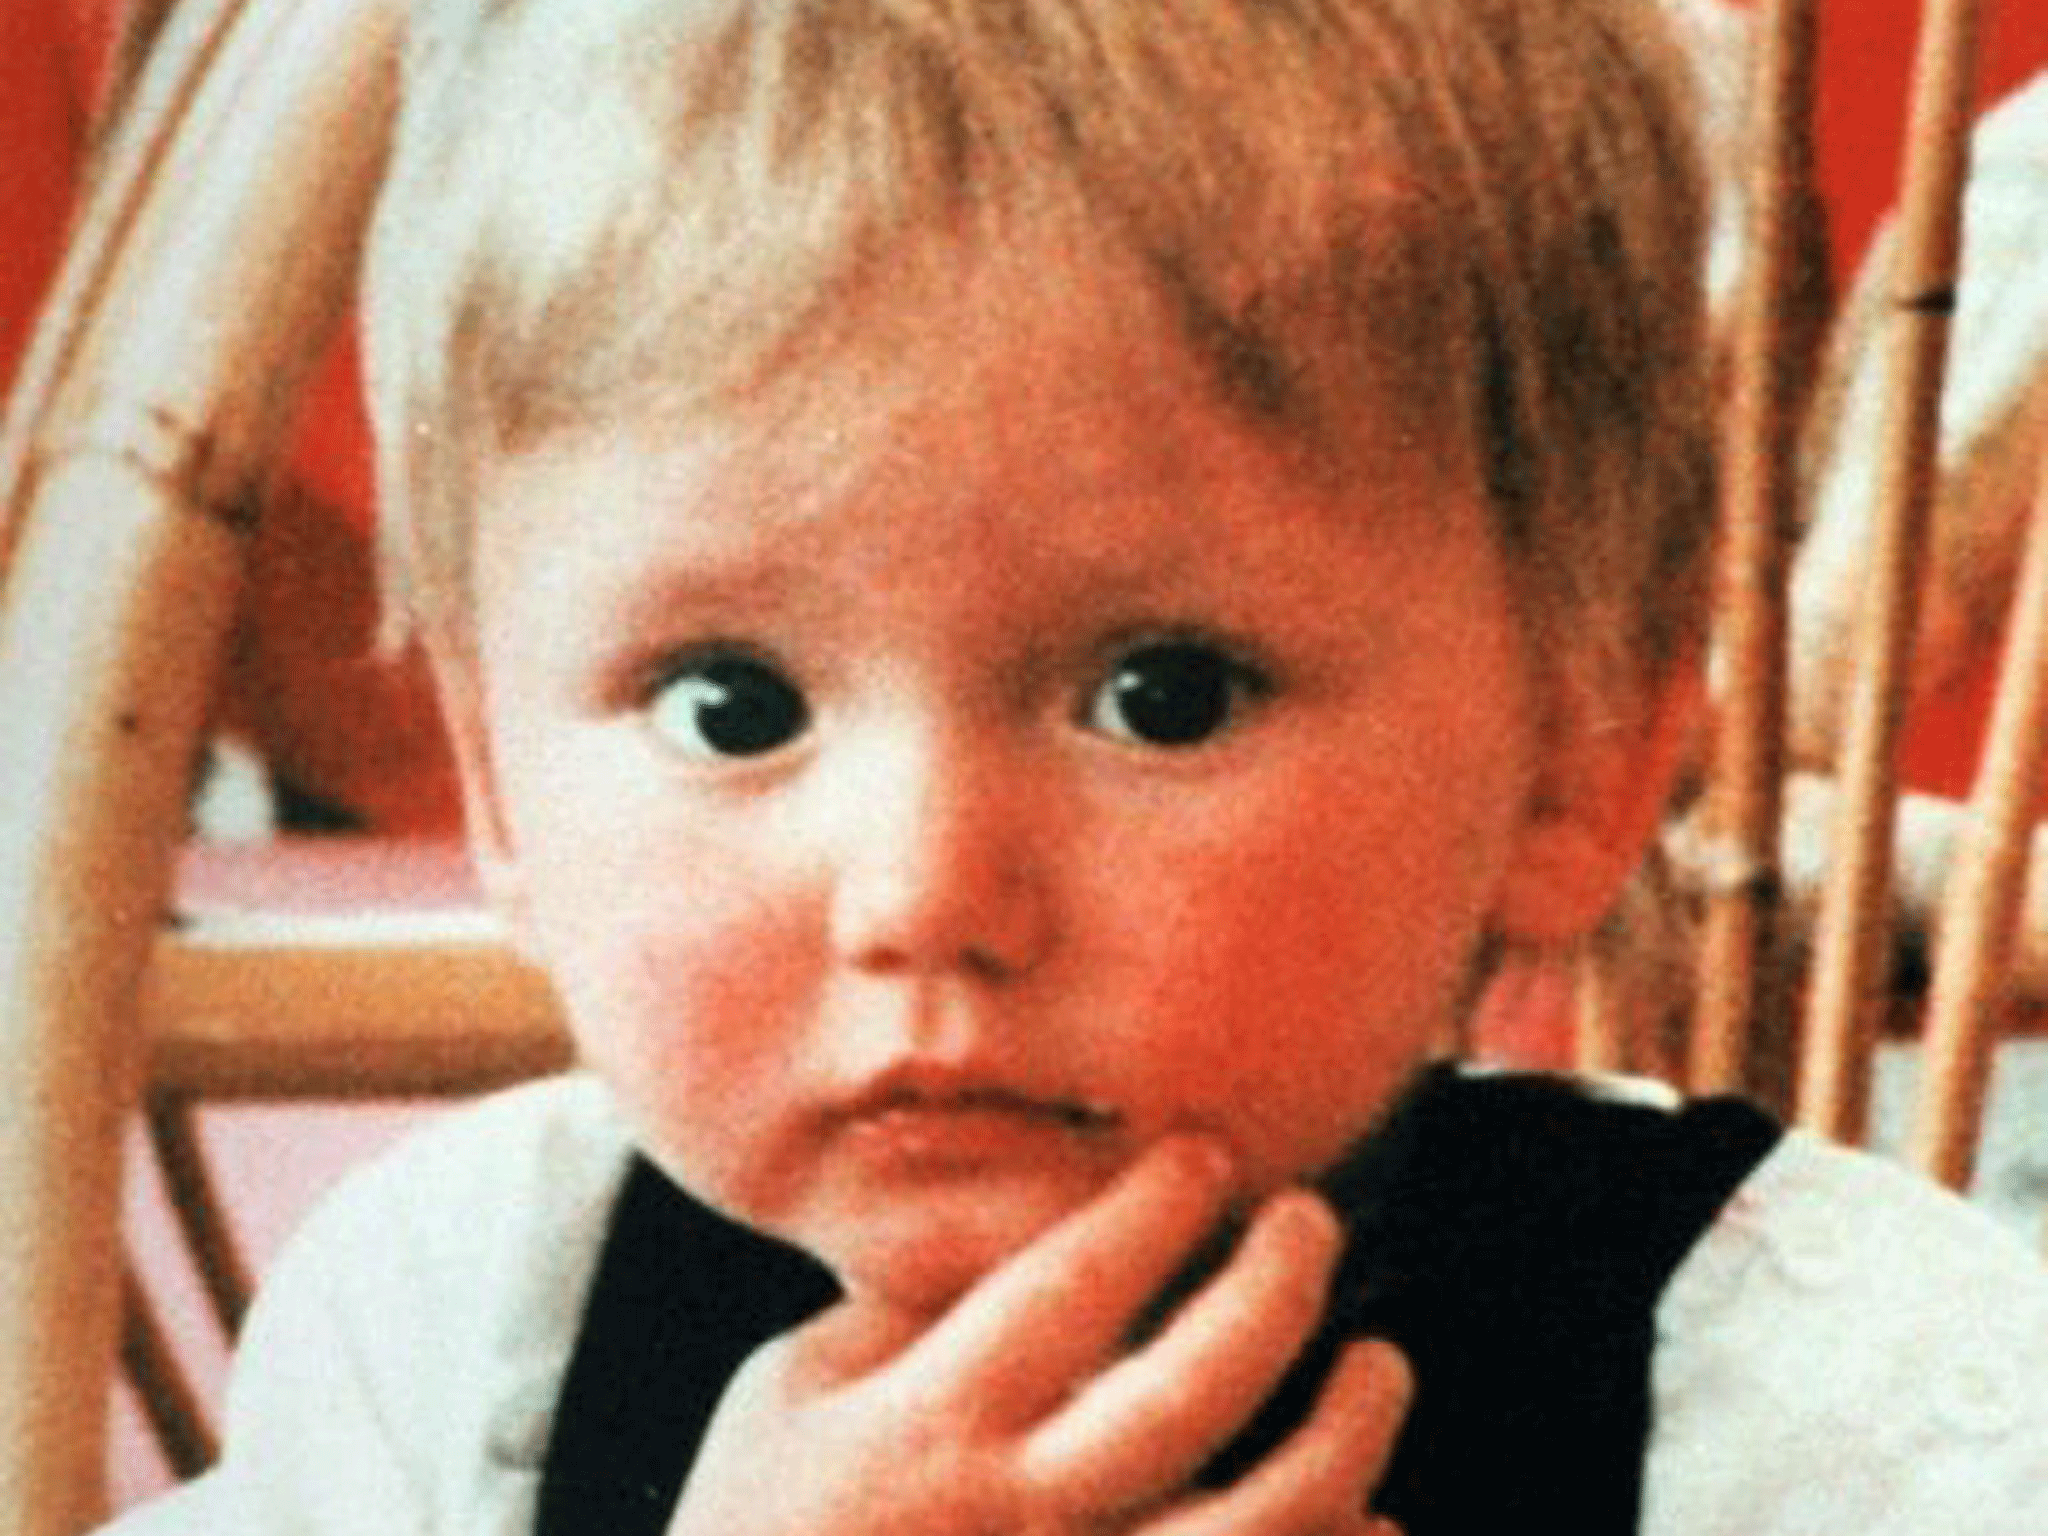 There have been several potential sightings of Ben Needham since he disappeared as a toddler 24 years ago